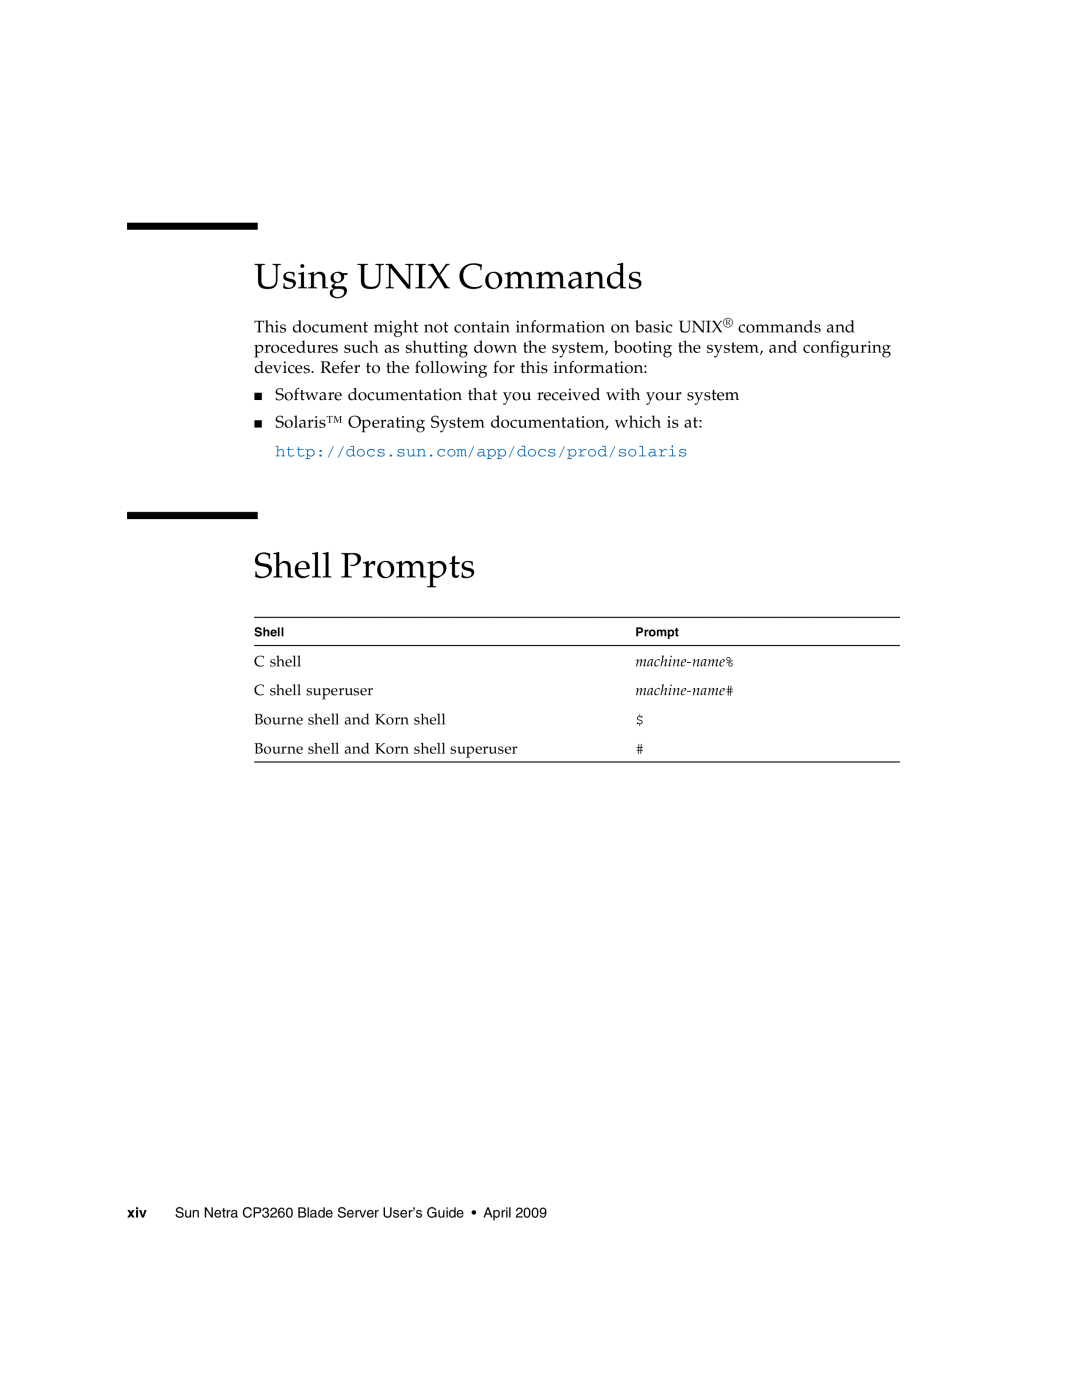 Sun Microsystems CP3260 manual Using UNIX Commands, Shell Prompts 